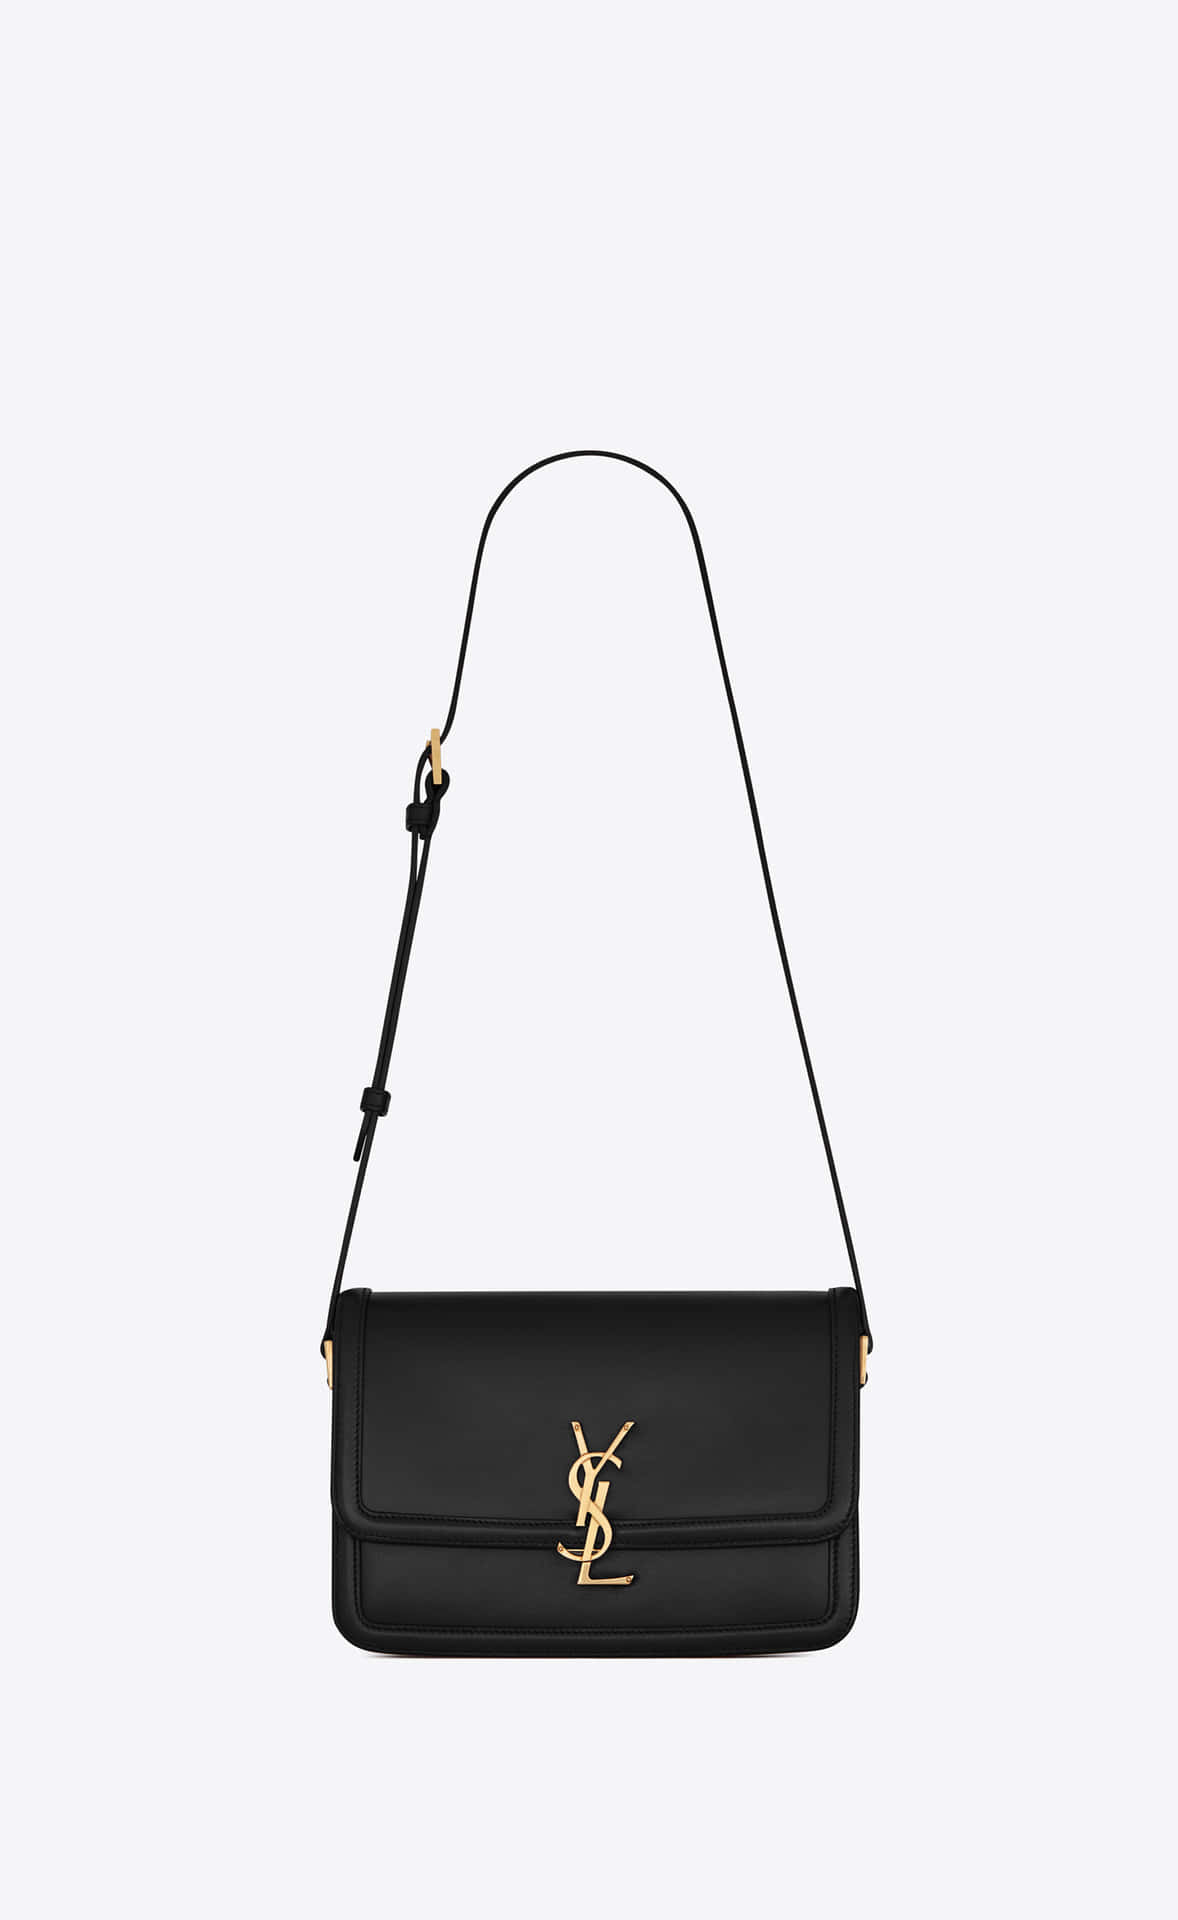 Look and Feel Divine in YSL